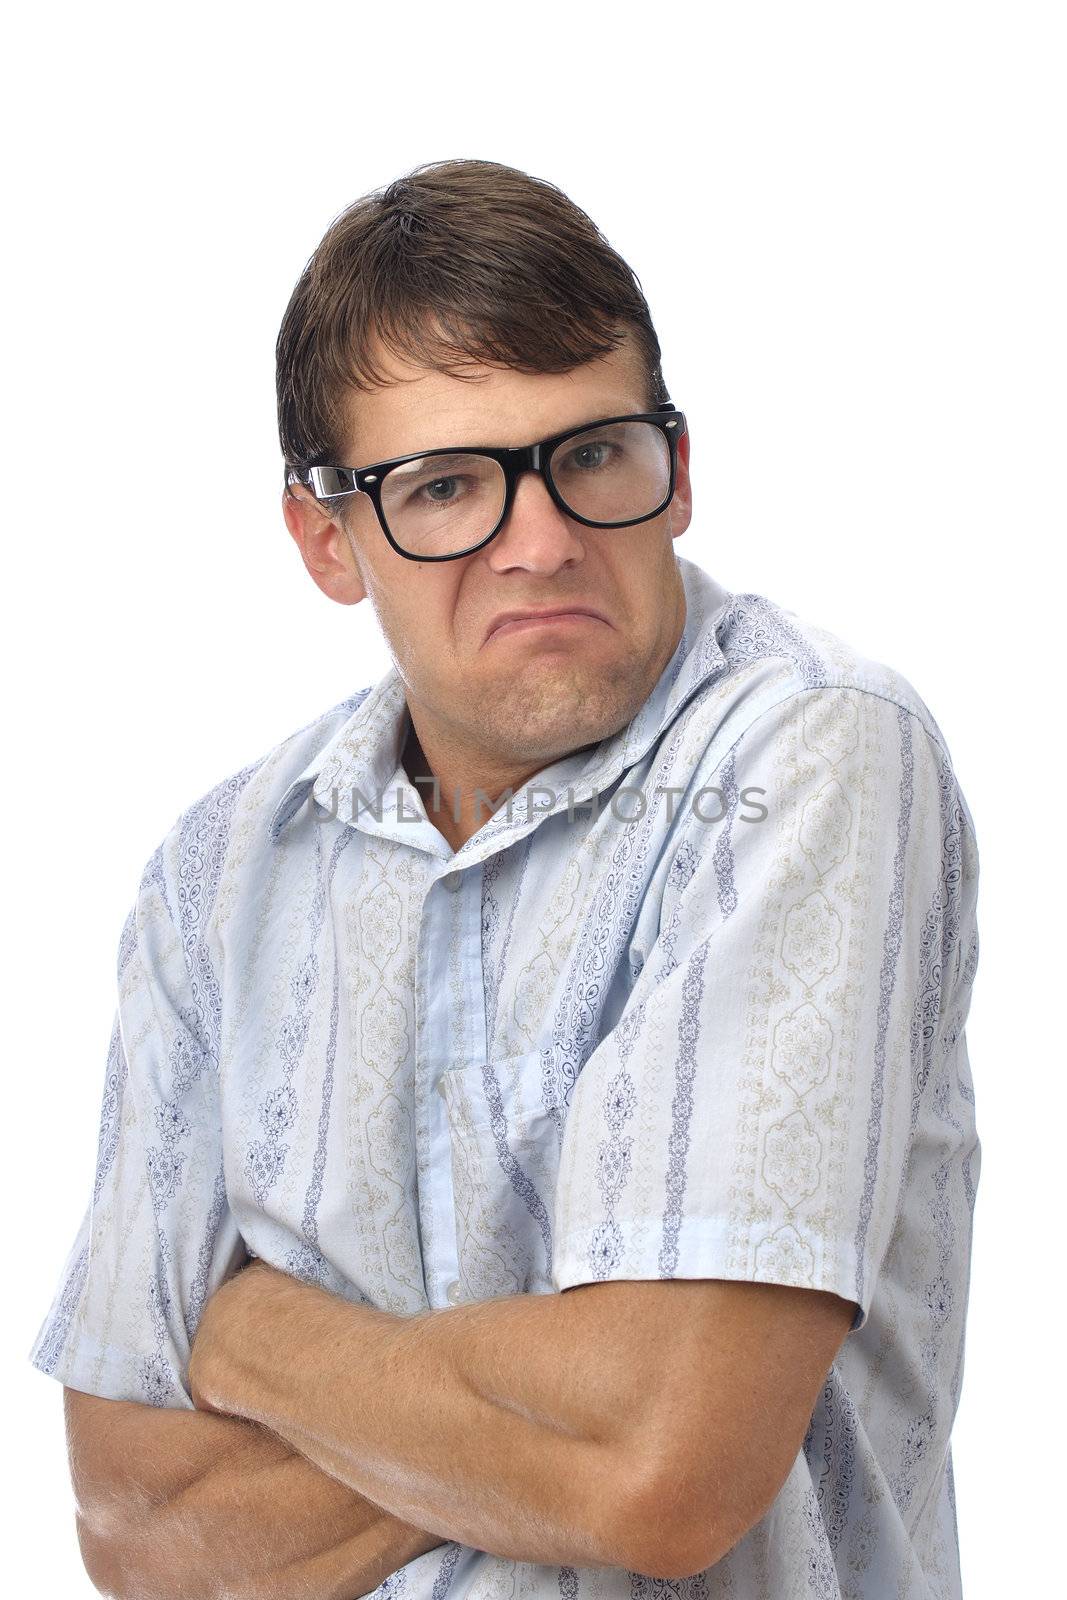 Male nerd with glasses makes pouty face on white background